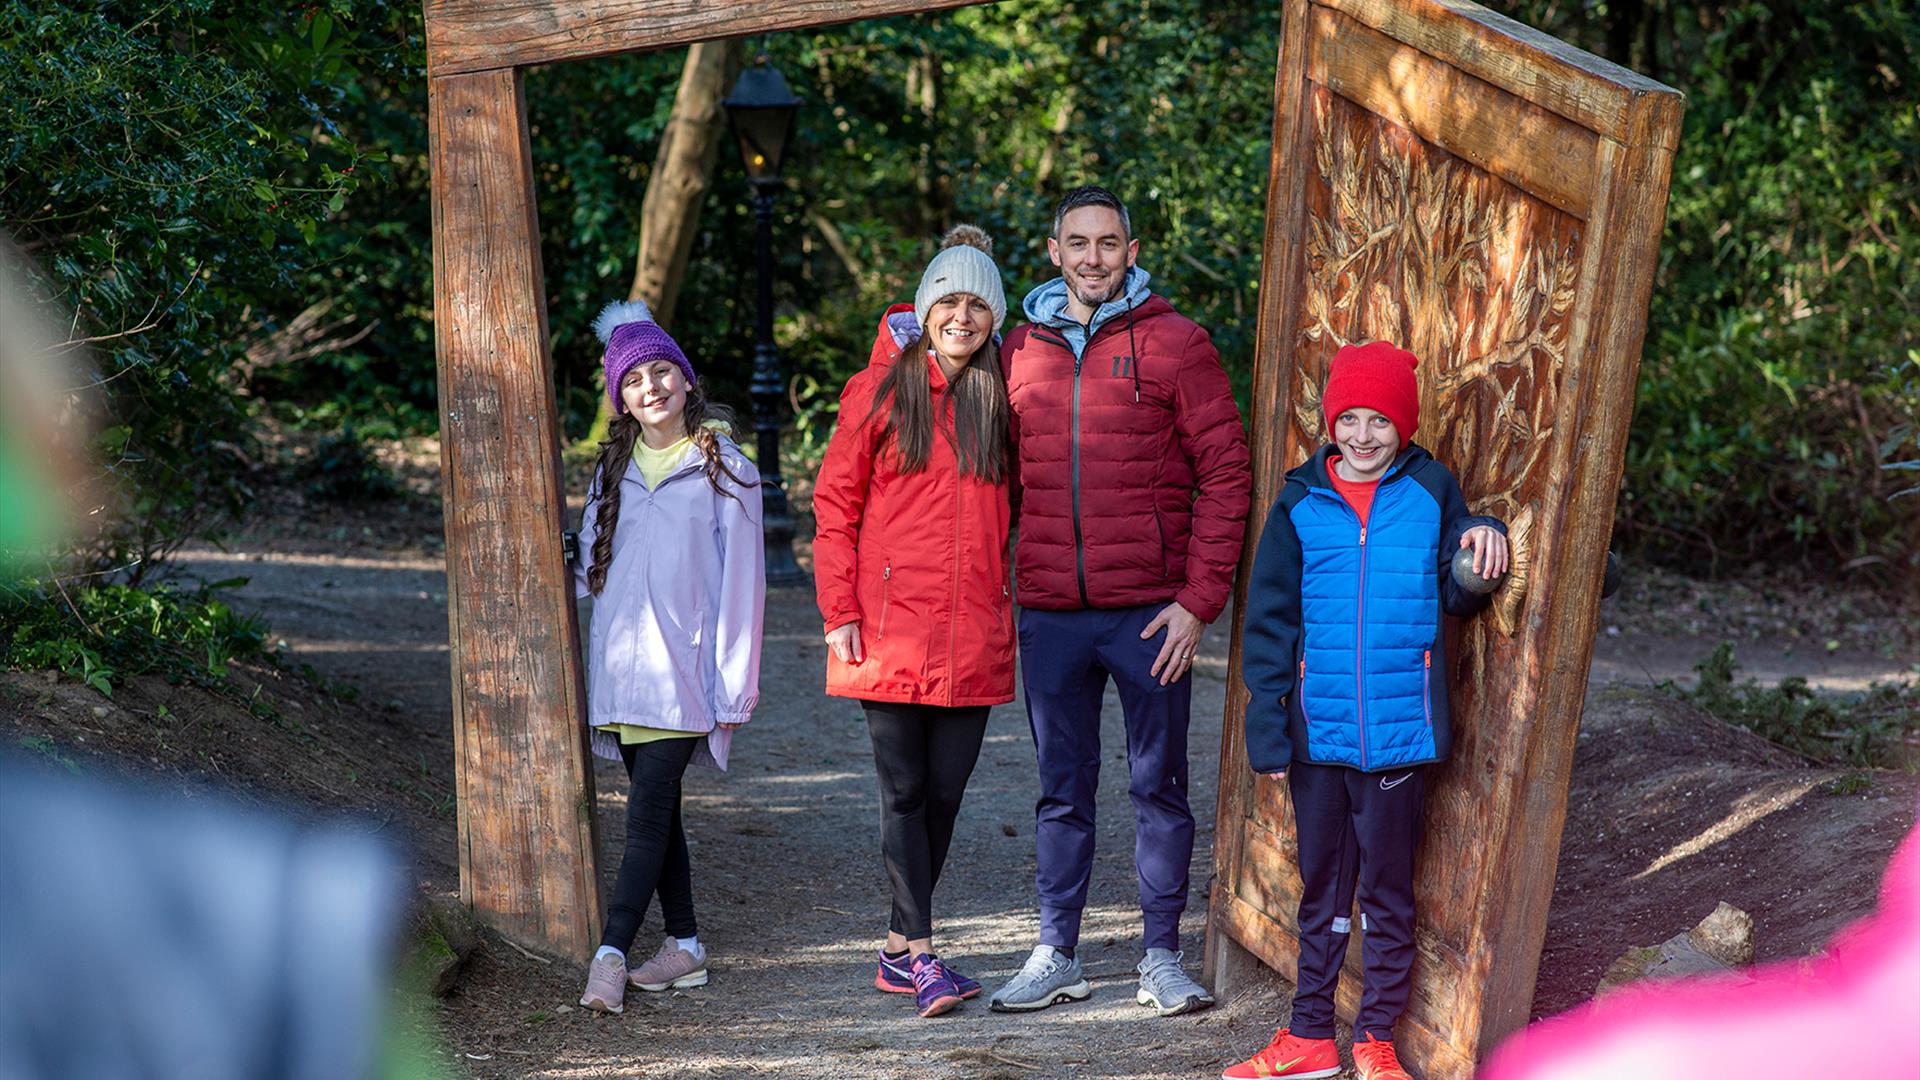 A family getting their picture taken as they walk through the wardrobe at the start of the Narnia Trail in Kilbroney Park, Rostrevor.